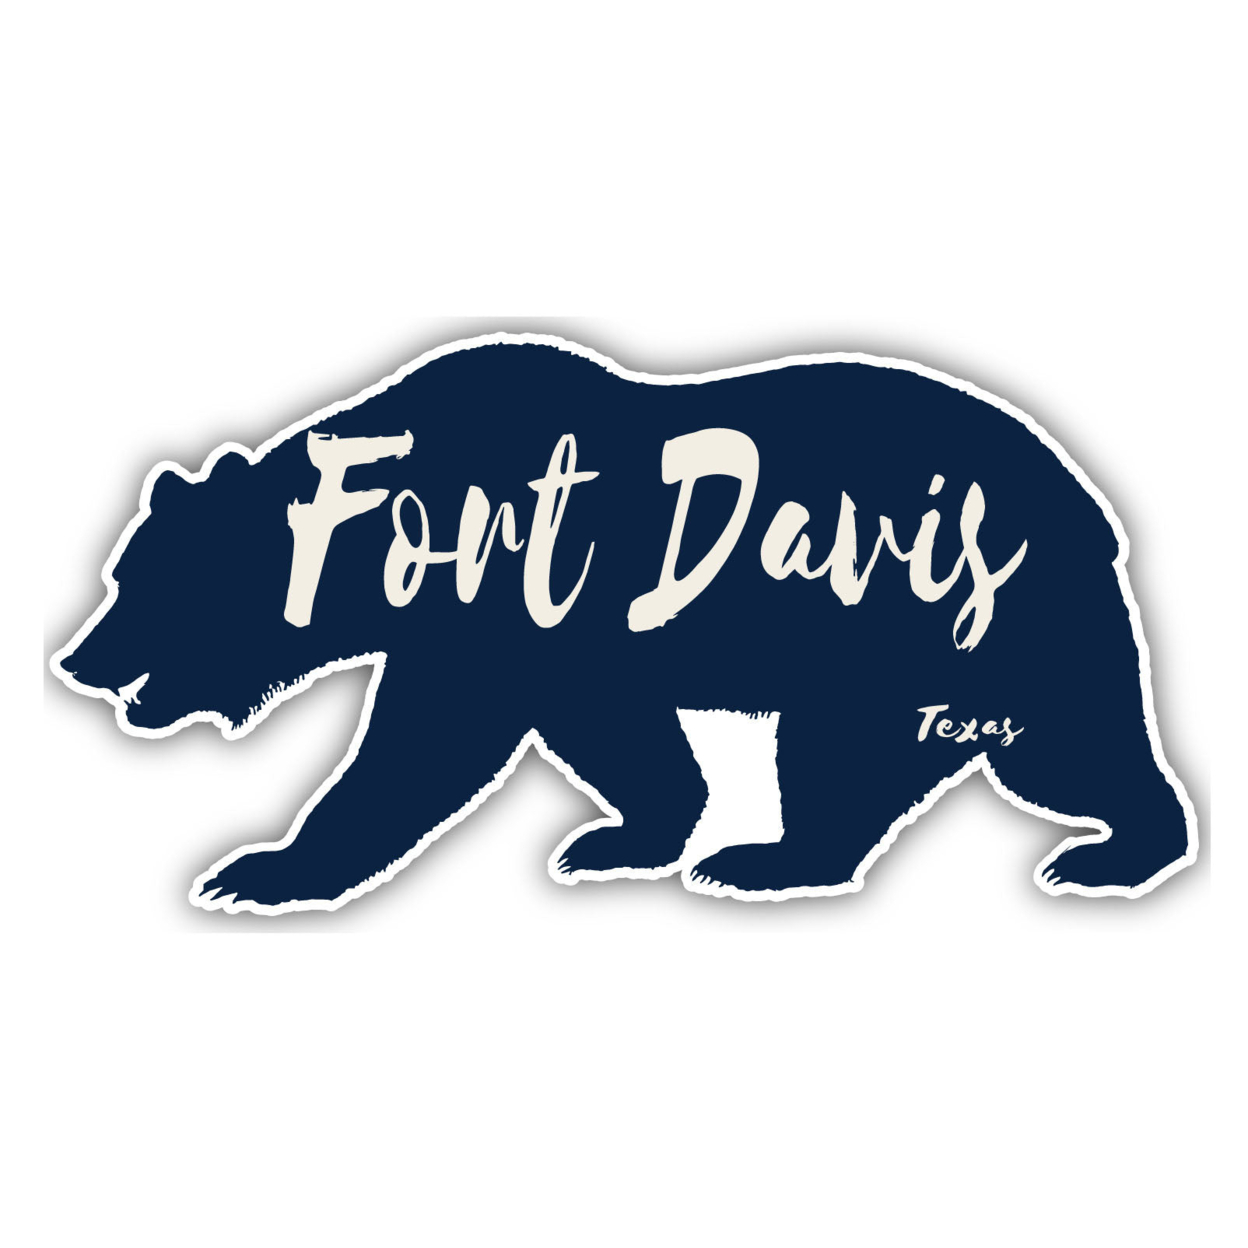 Fort Davis Texas Souvenir Decorative Stickers (Choose Theme And Size) - 4-Pack, 6-Inch, Tent